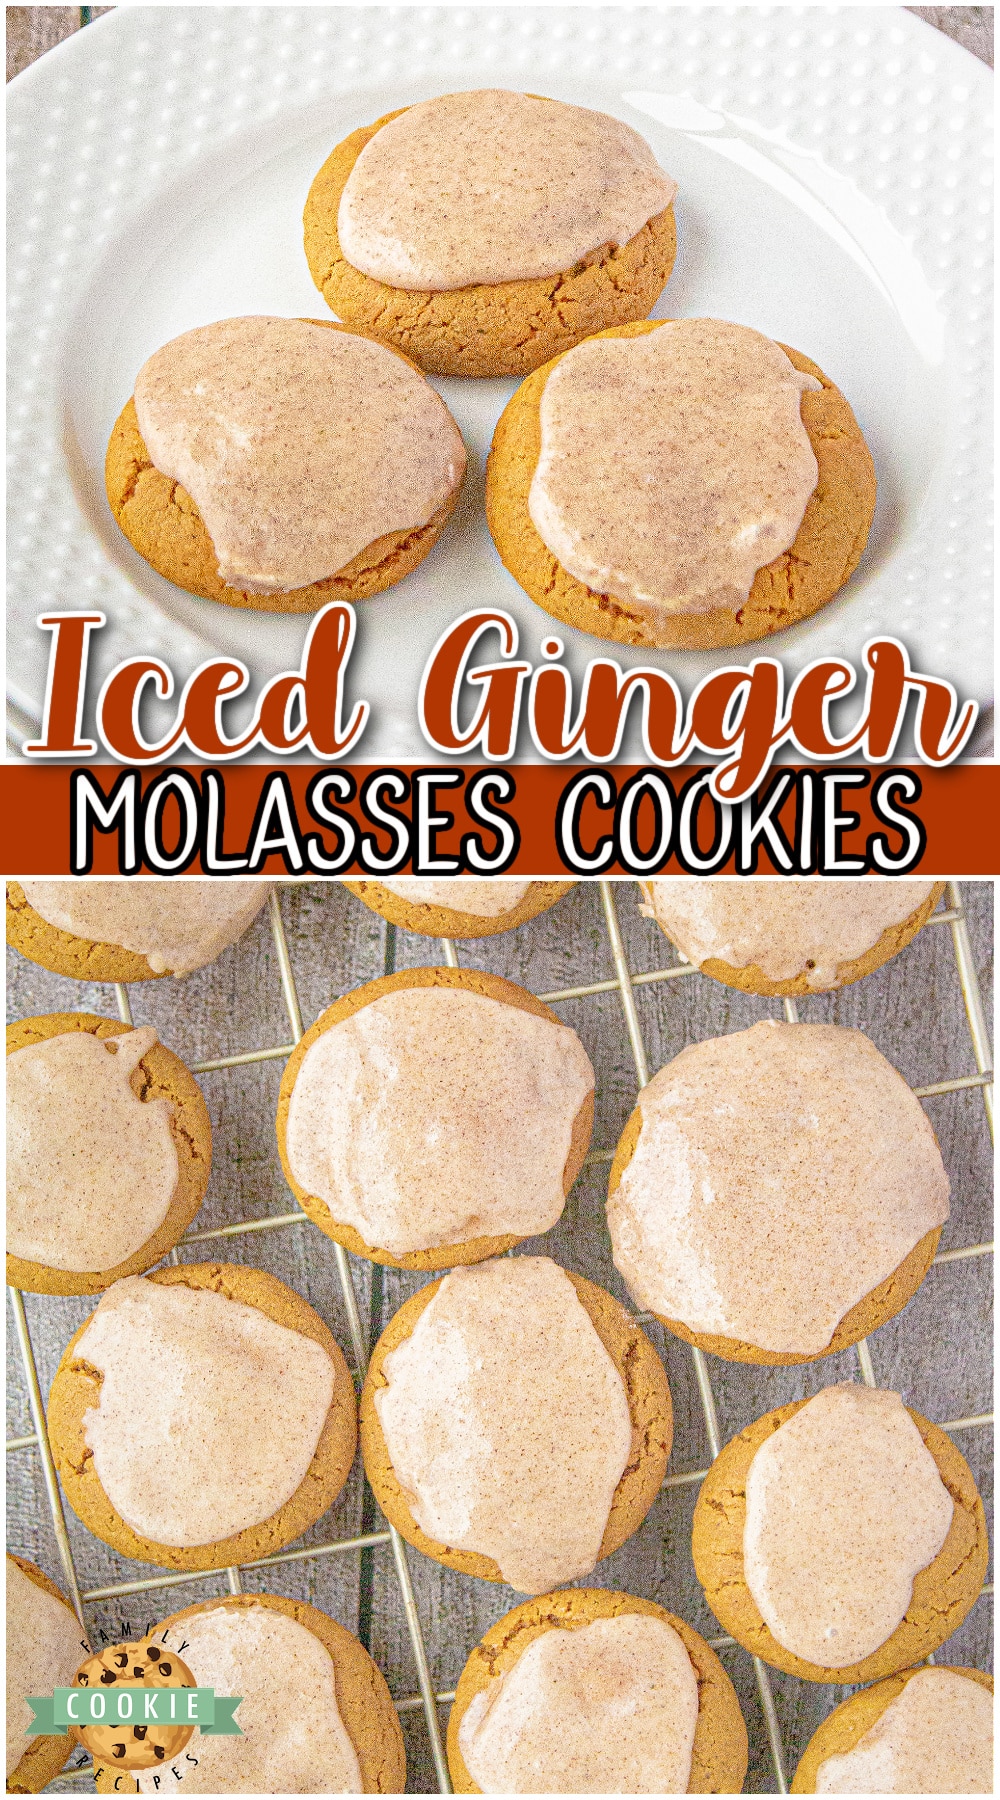 Iced Ginger Molasses Cookies are soft, chewy, & perfectly spiced! Molasses ginger cookies topped with warm cinnamon icing everyone loves!